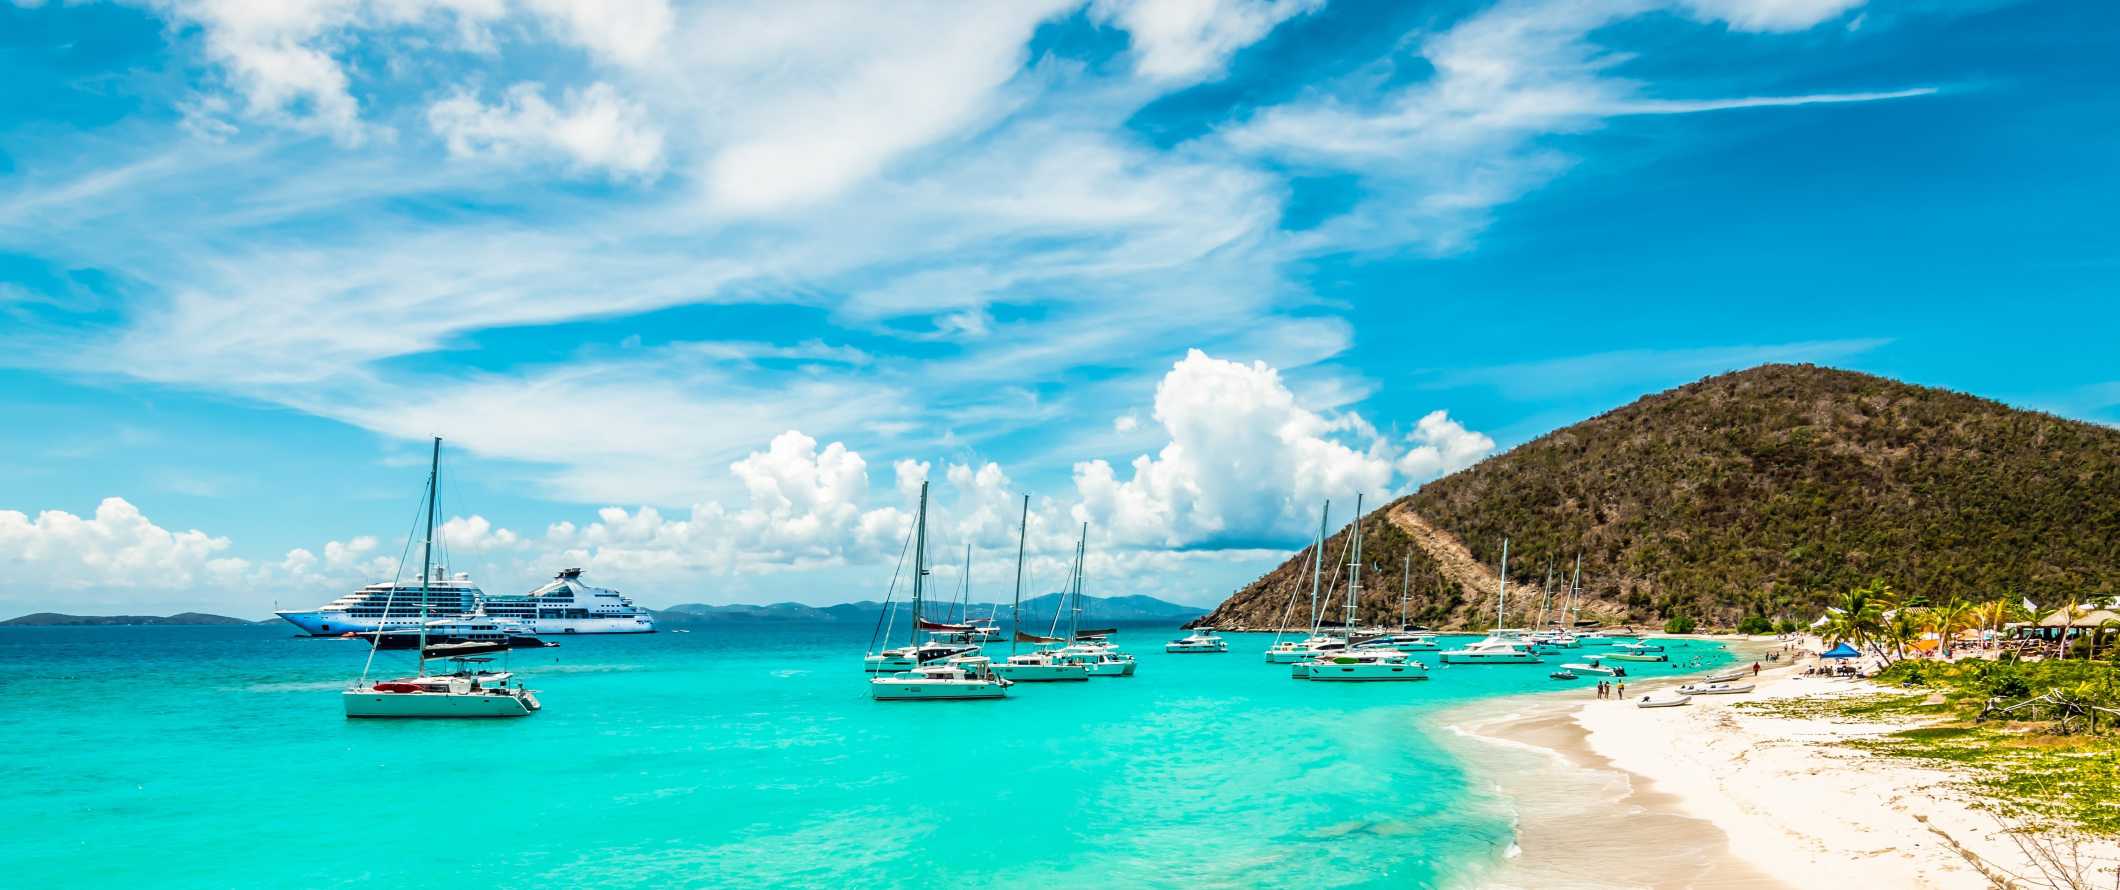 Sailboats parked in the azure waters of the party island of Jost Van Dyke in the British Virgin Islands